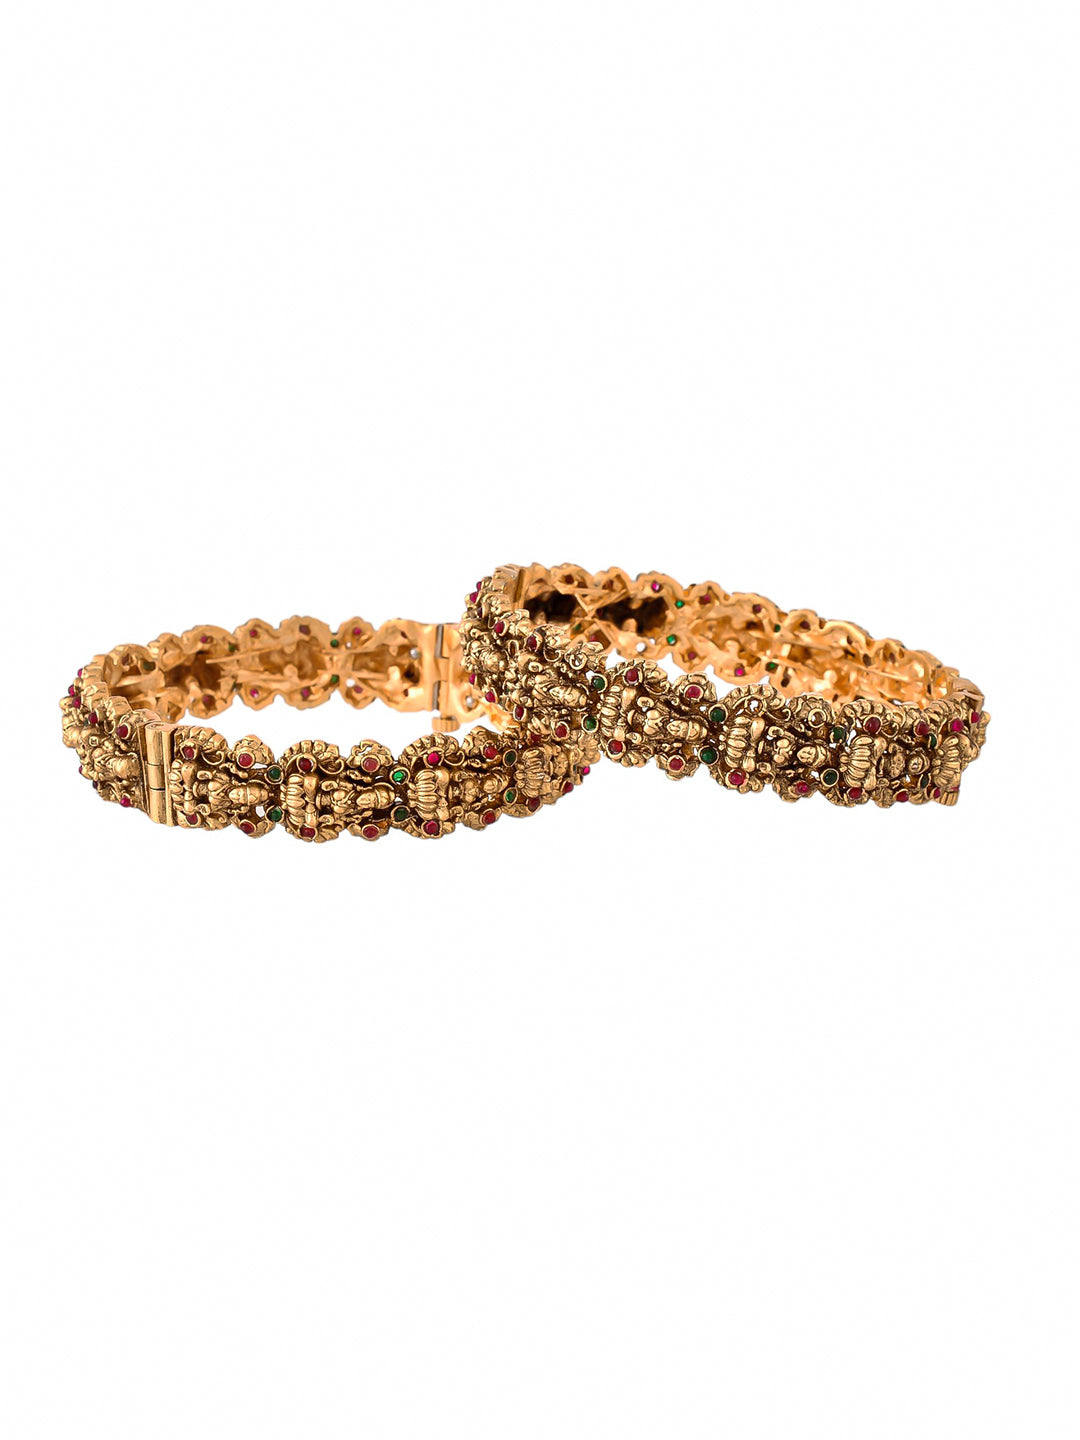 Elevate your style with our South Indian Traditional Temple Bangle Style Gold Plated Bracelet for women. Expertly crafted with stunning details, this bracelet is the perfect accessory for any attire. Made from high-quality materials, it is built to last and add a touch of elegance to your look.